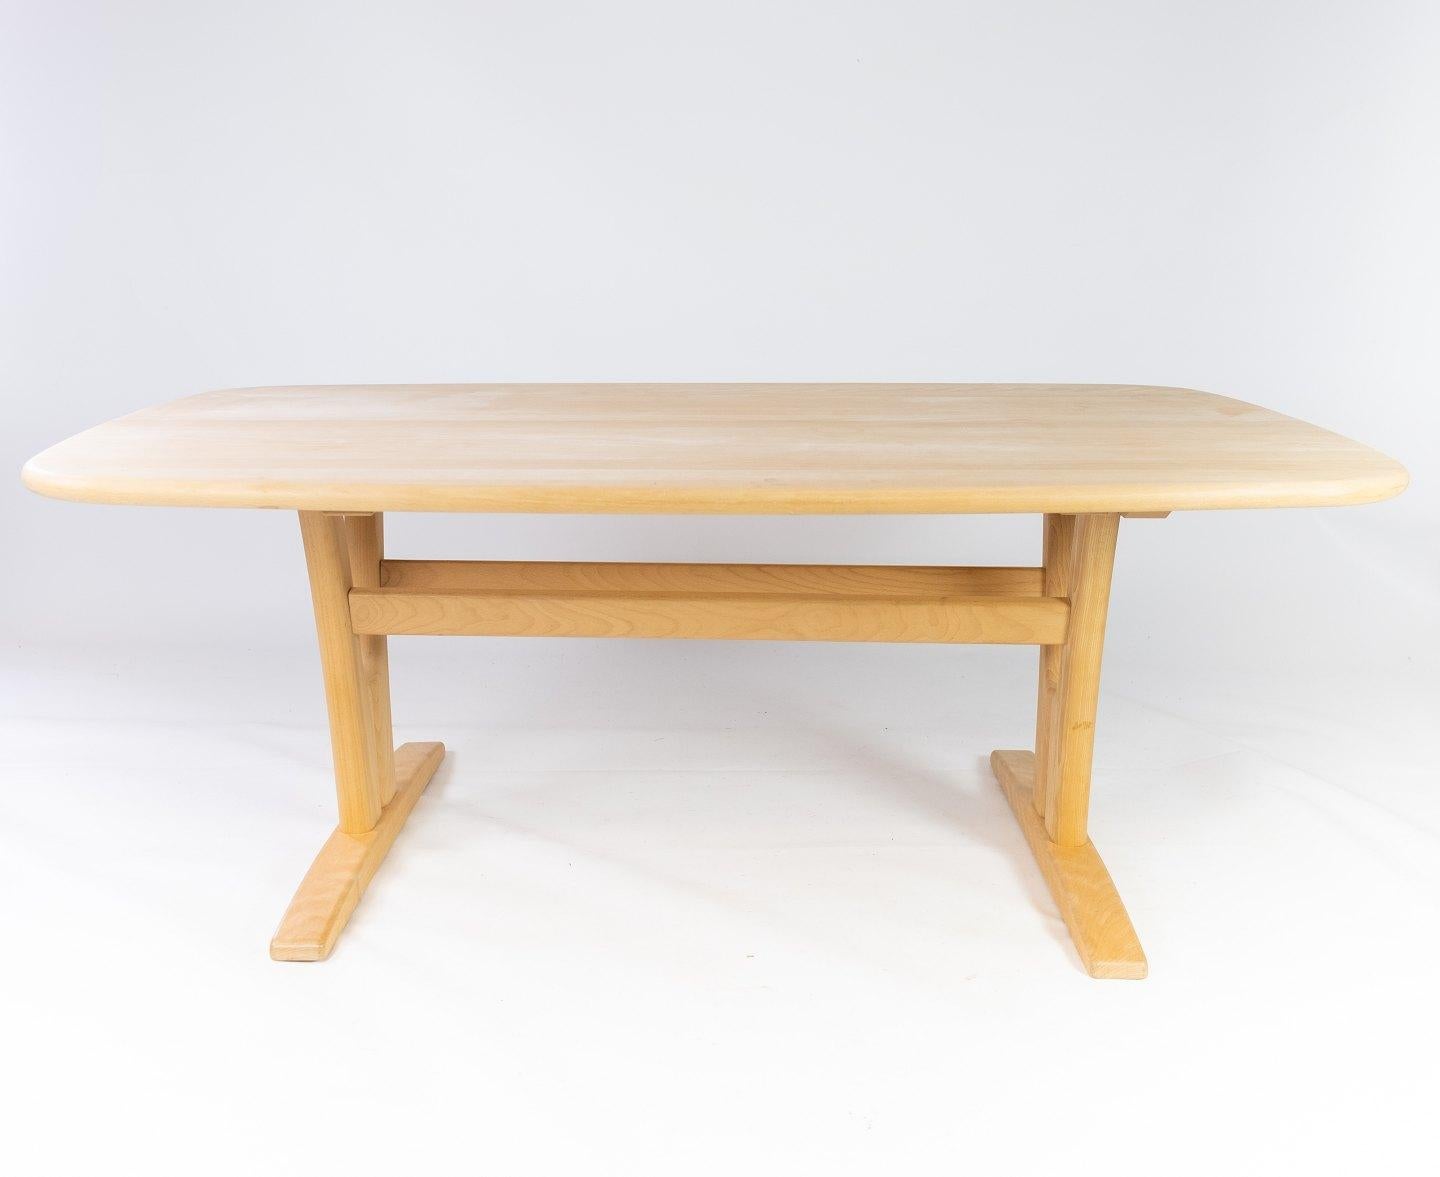 This Danish-designed coffee table, crafted by the renowned Skovby Furniture factory in the 1960s, embodies the essence of mid-century modern style. Constructed from sturdy beech wood, it showcases the era's emphasis on clean lines, organic shapes,